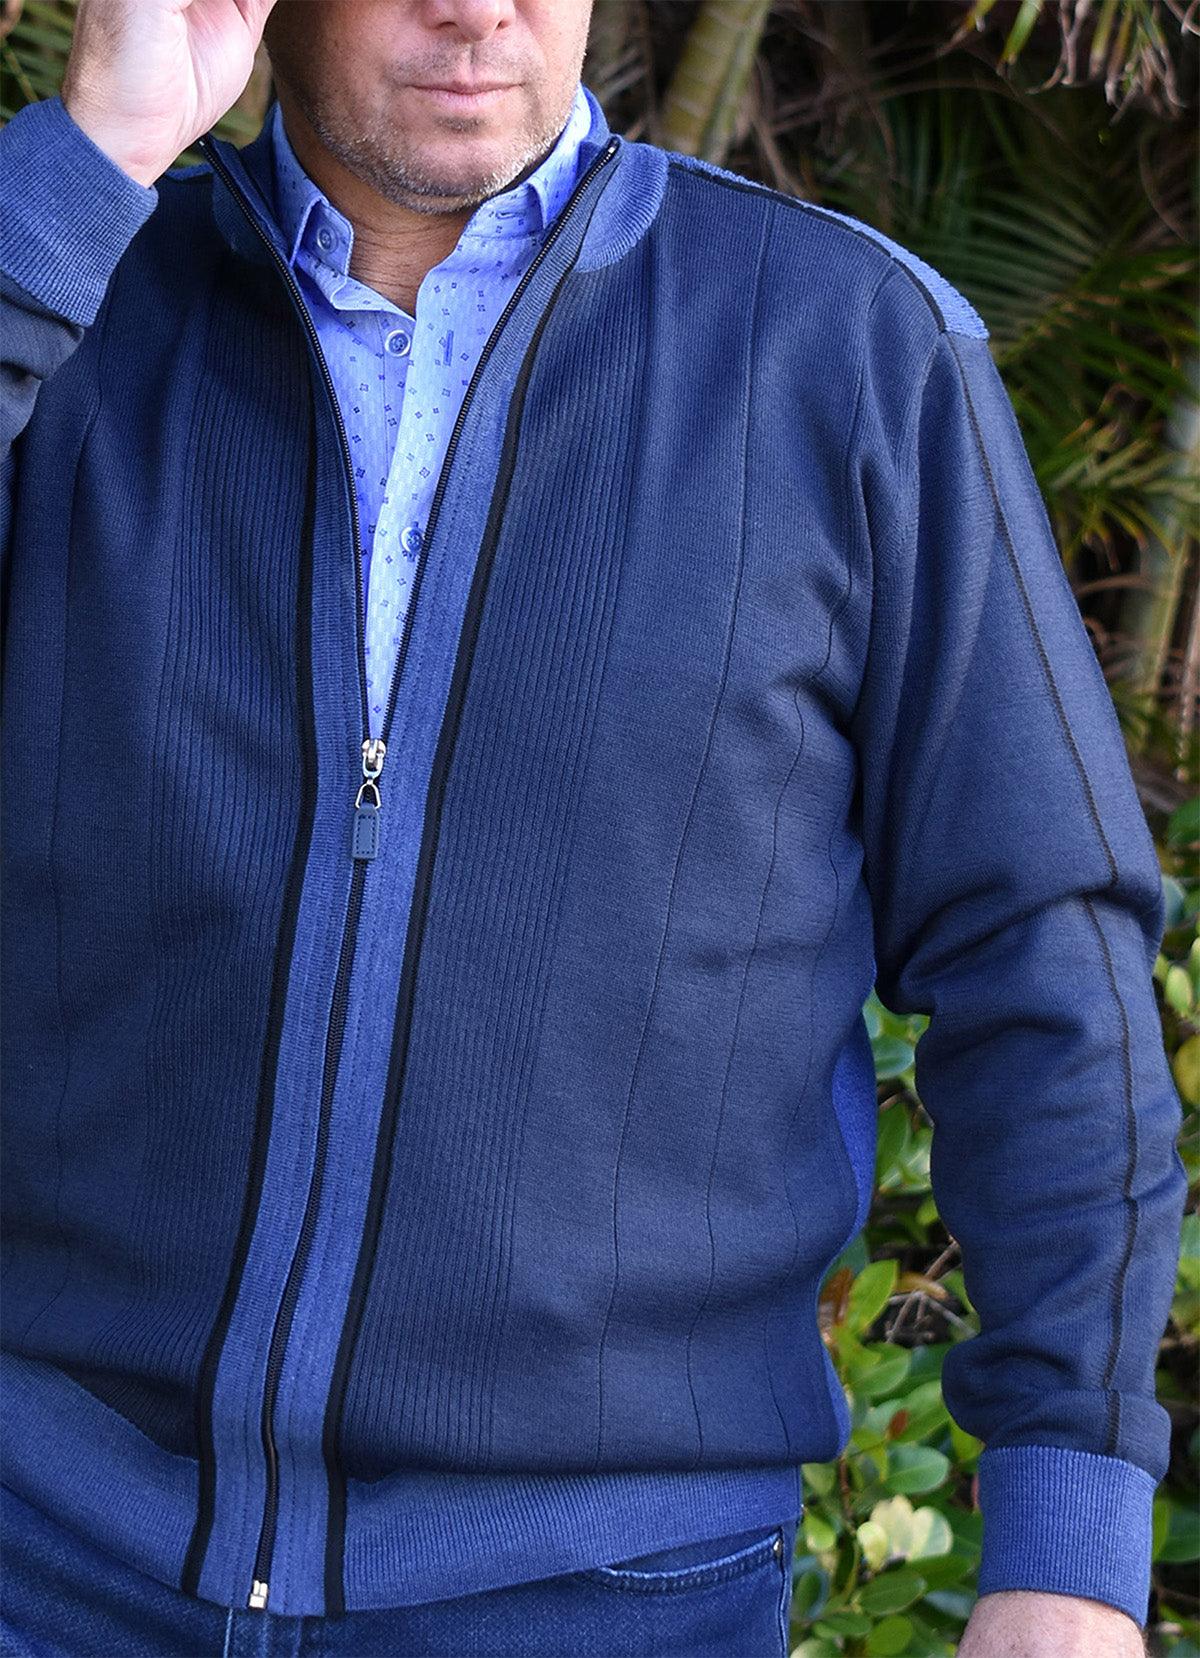 The full zip cardigan sweater is an excellent look worn alone, over a tee or over a shirt.  Either way the style is updated fashion at its finest.  Rib detailing with contrast coloring add a sport image to a zip cardigan model.  Designed by Marcello Sport.